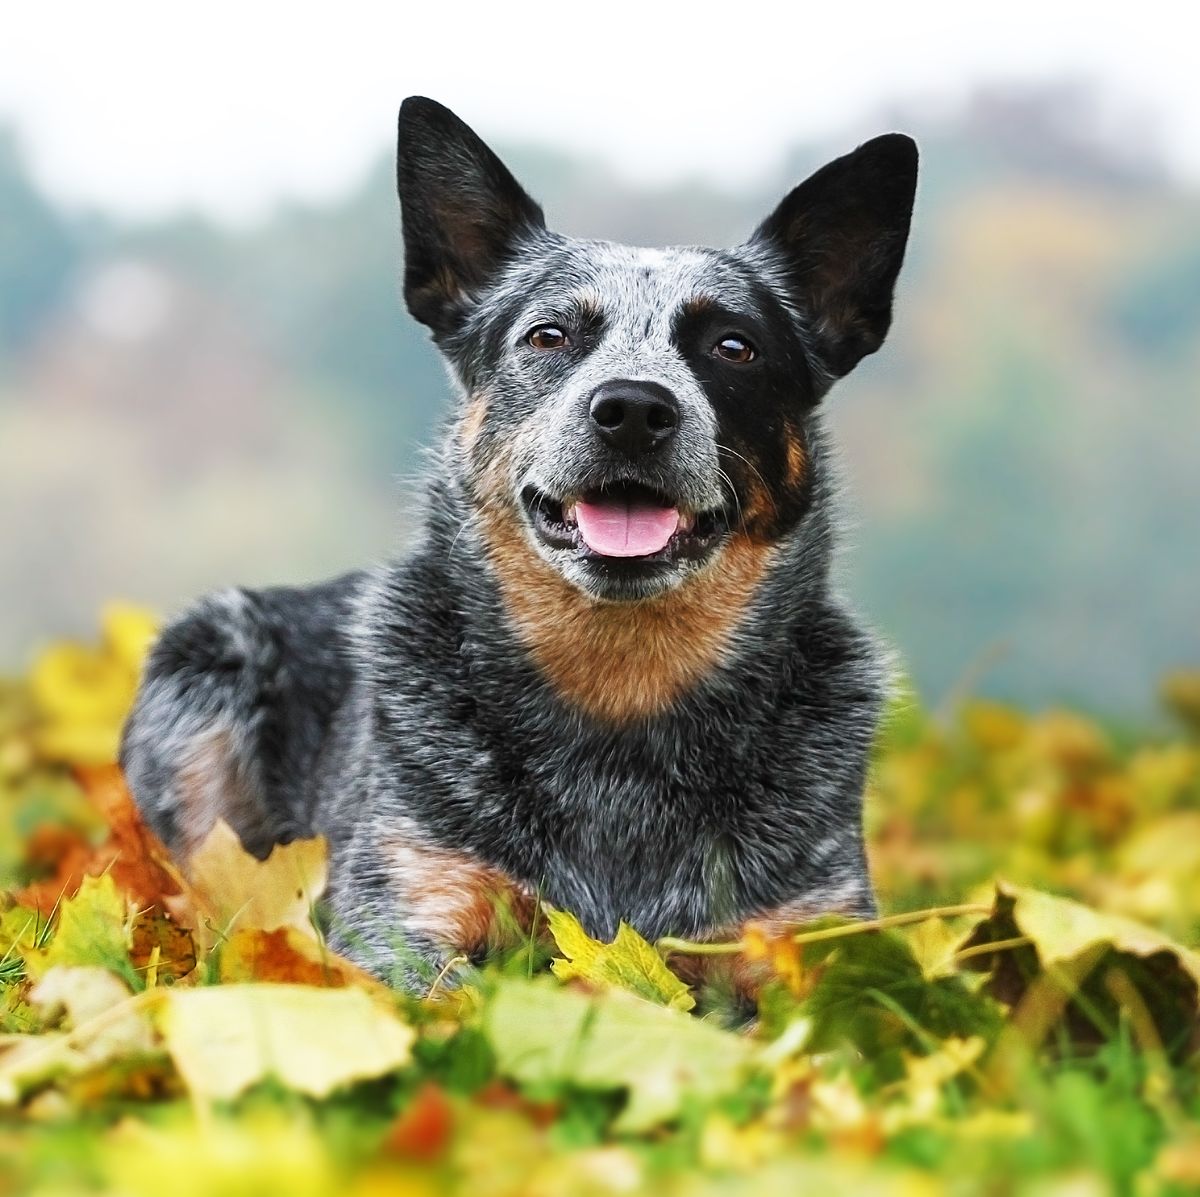 Longest Living Dog Breeds - Top Dog Types That Have a Long Life